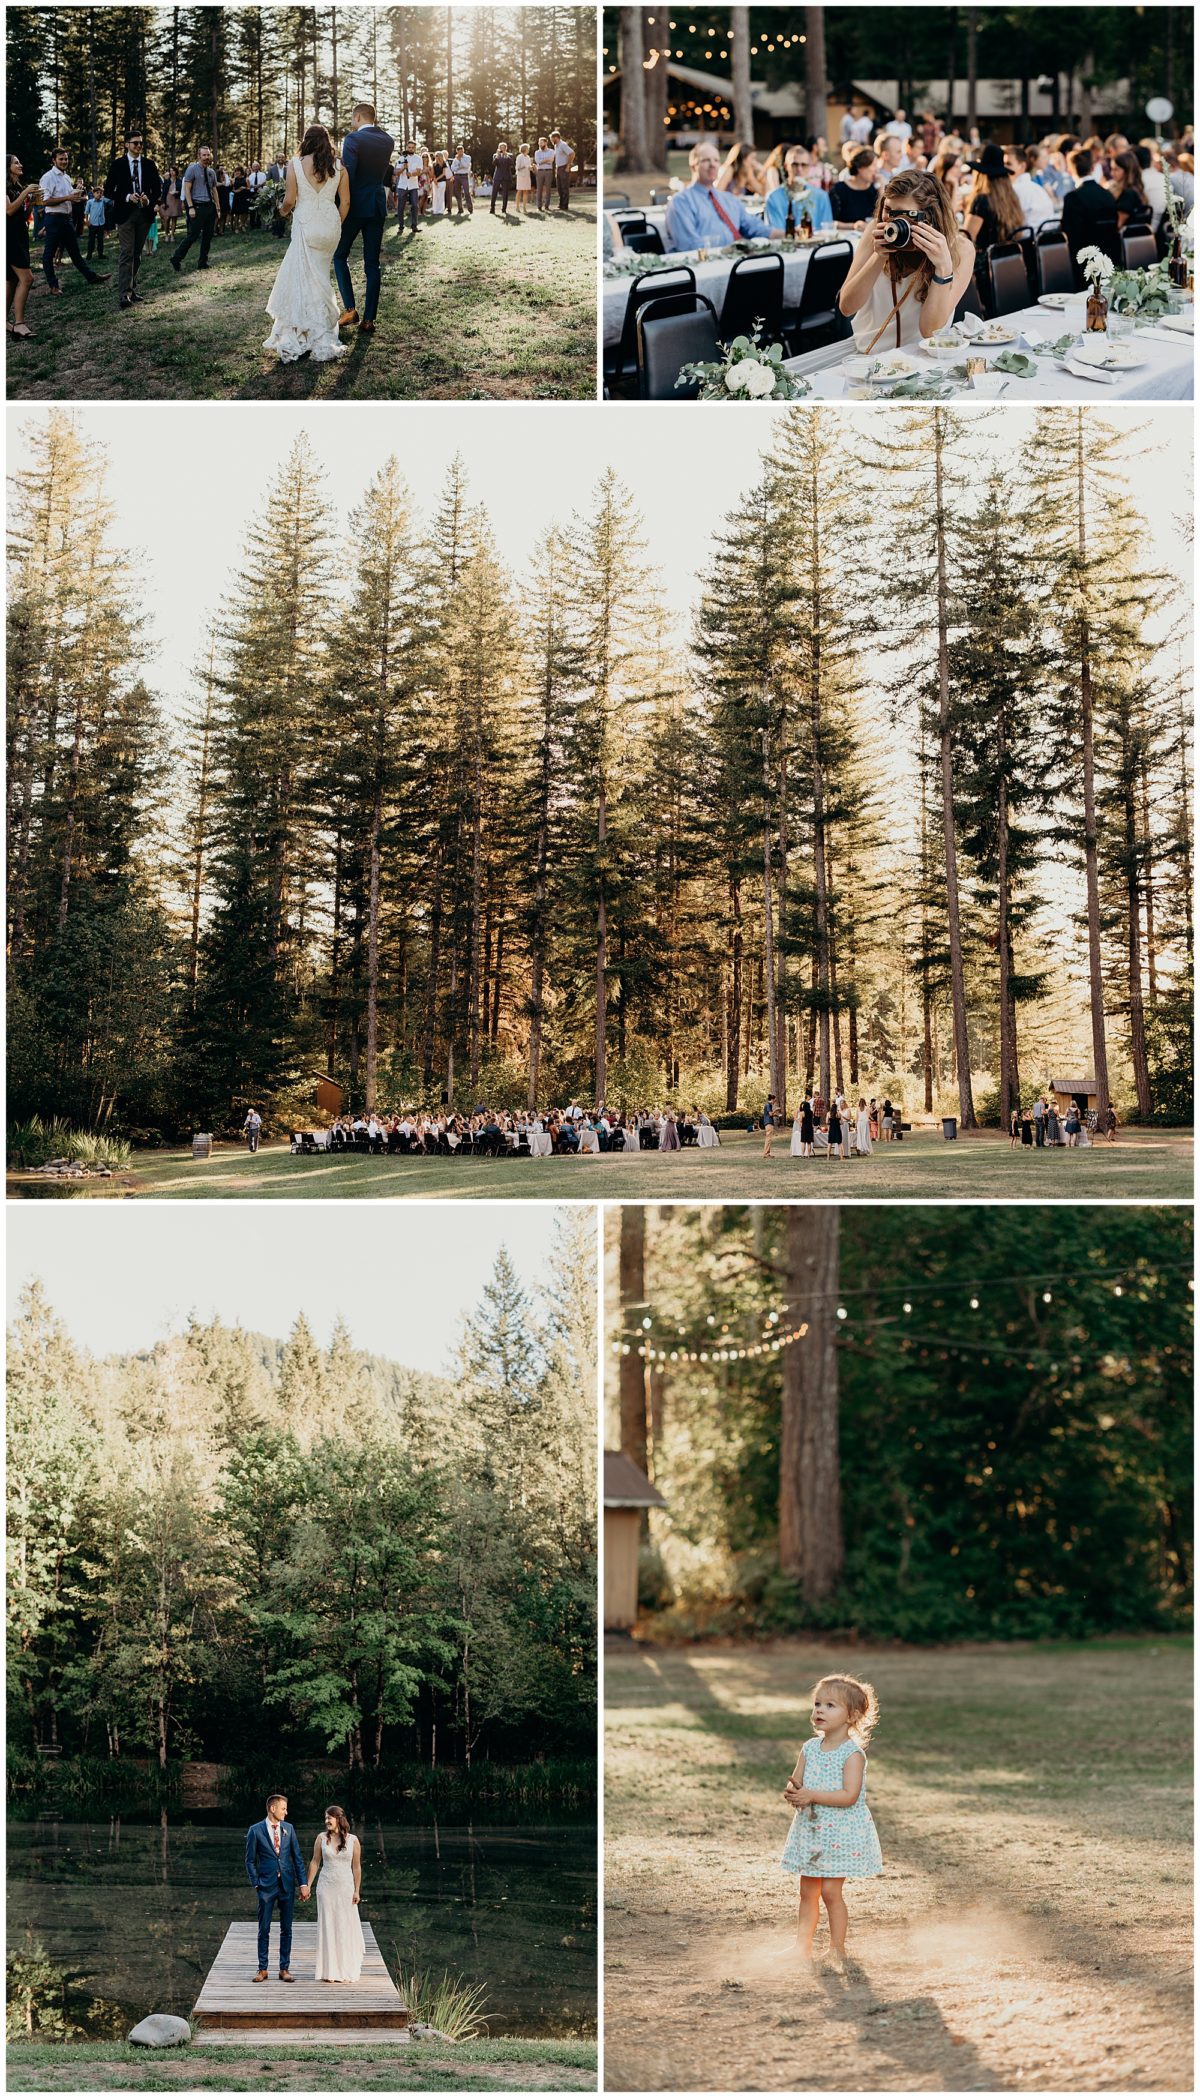 A beautiful outdoor wedding reception in the woods of Camp Cascade in Lyons, Oregon. Photography by PNW wedding photographer, Briana Morrison